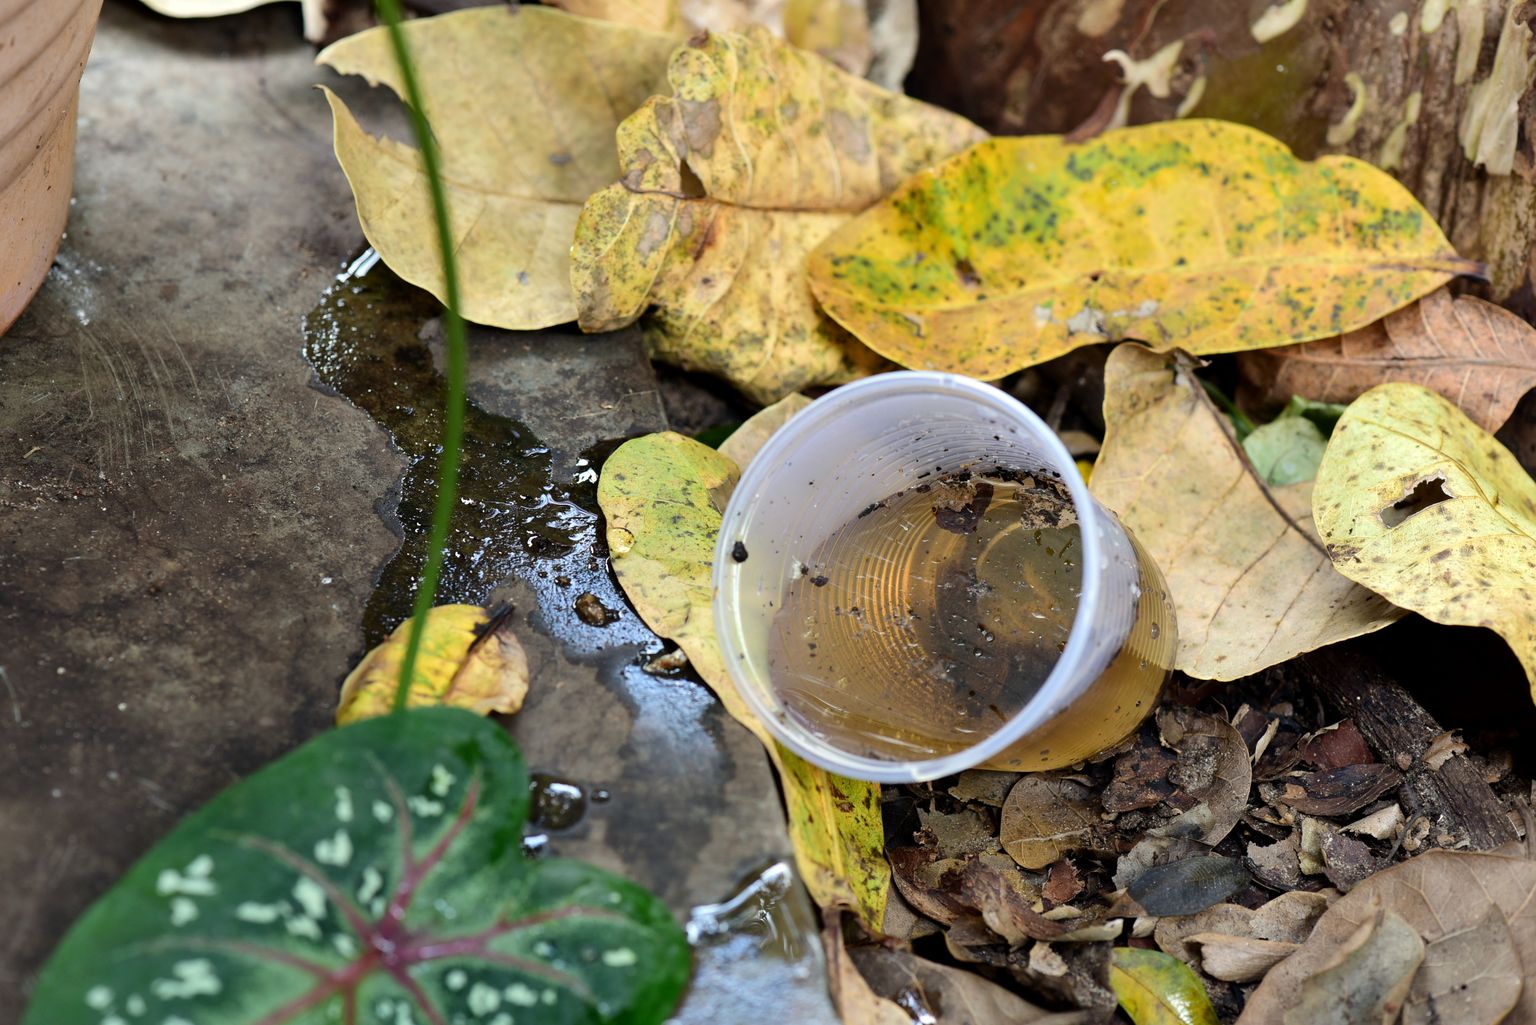 Plastic cup with dirty water on leaf background